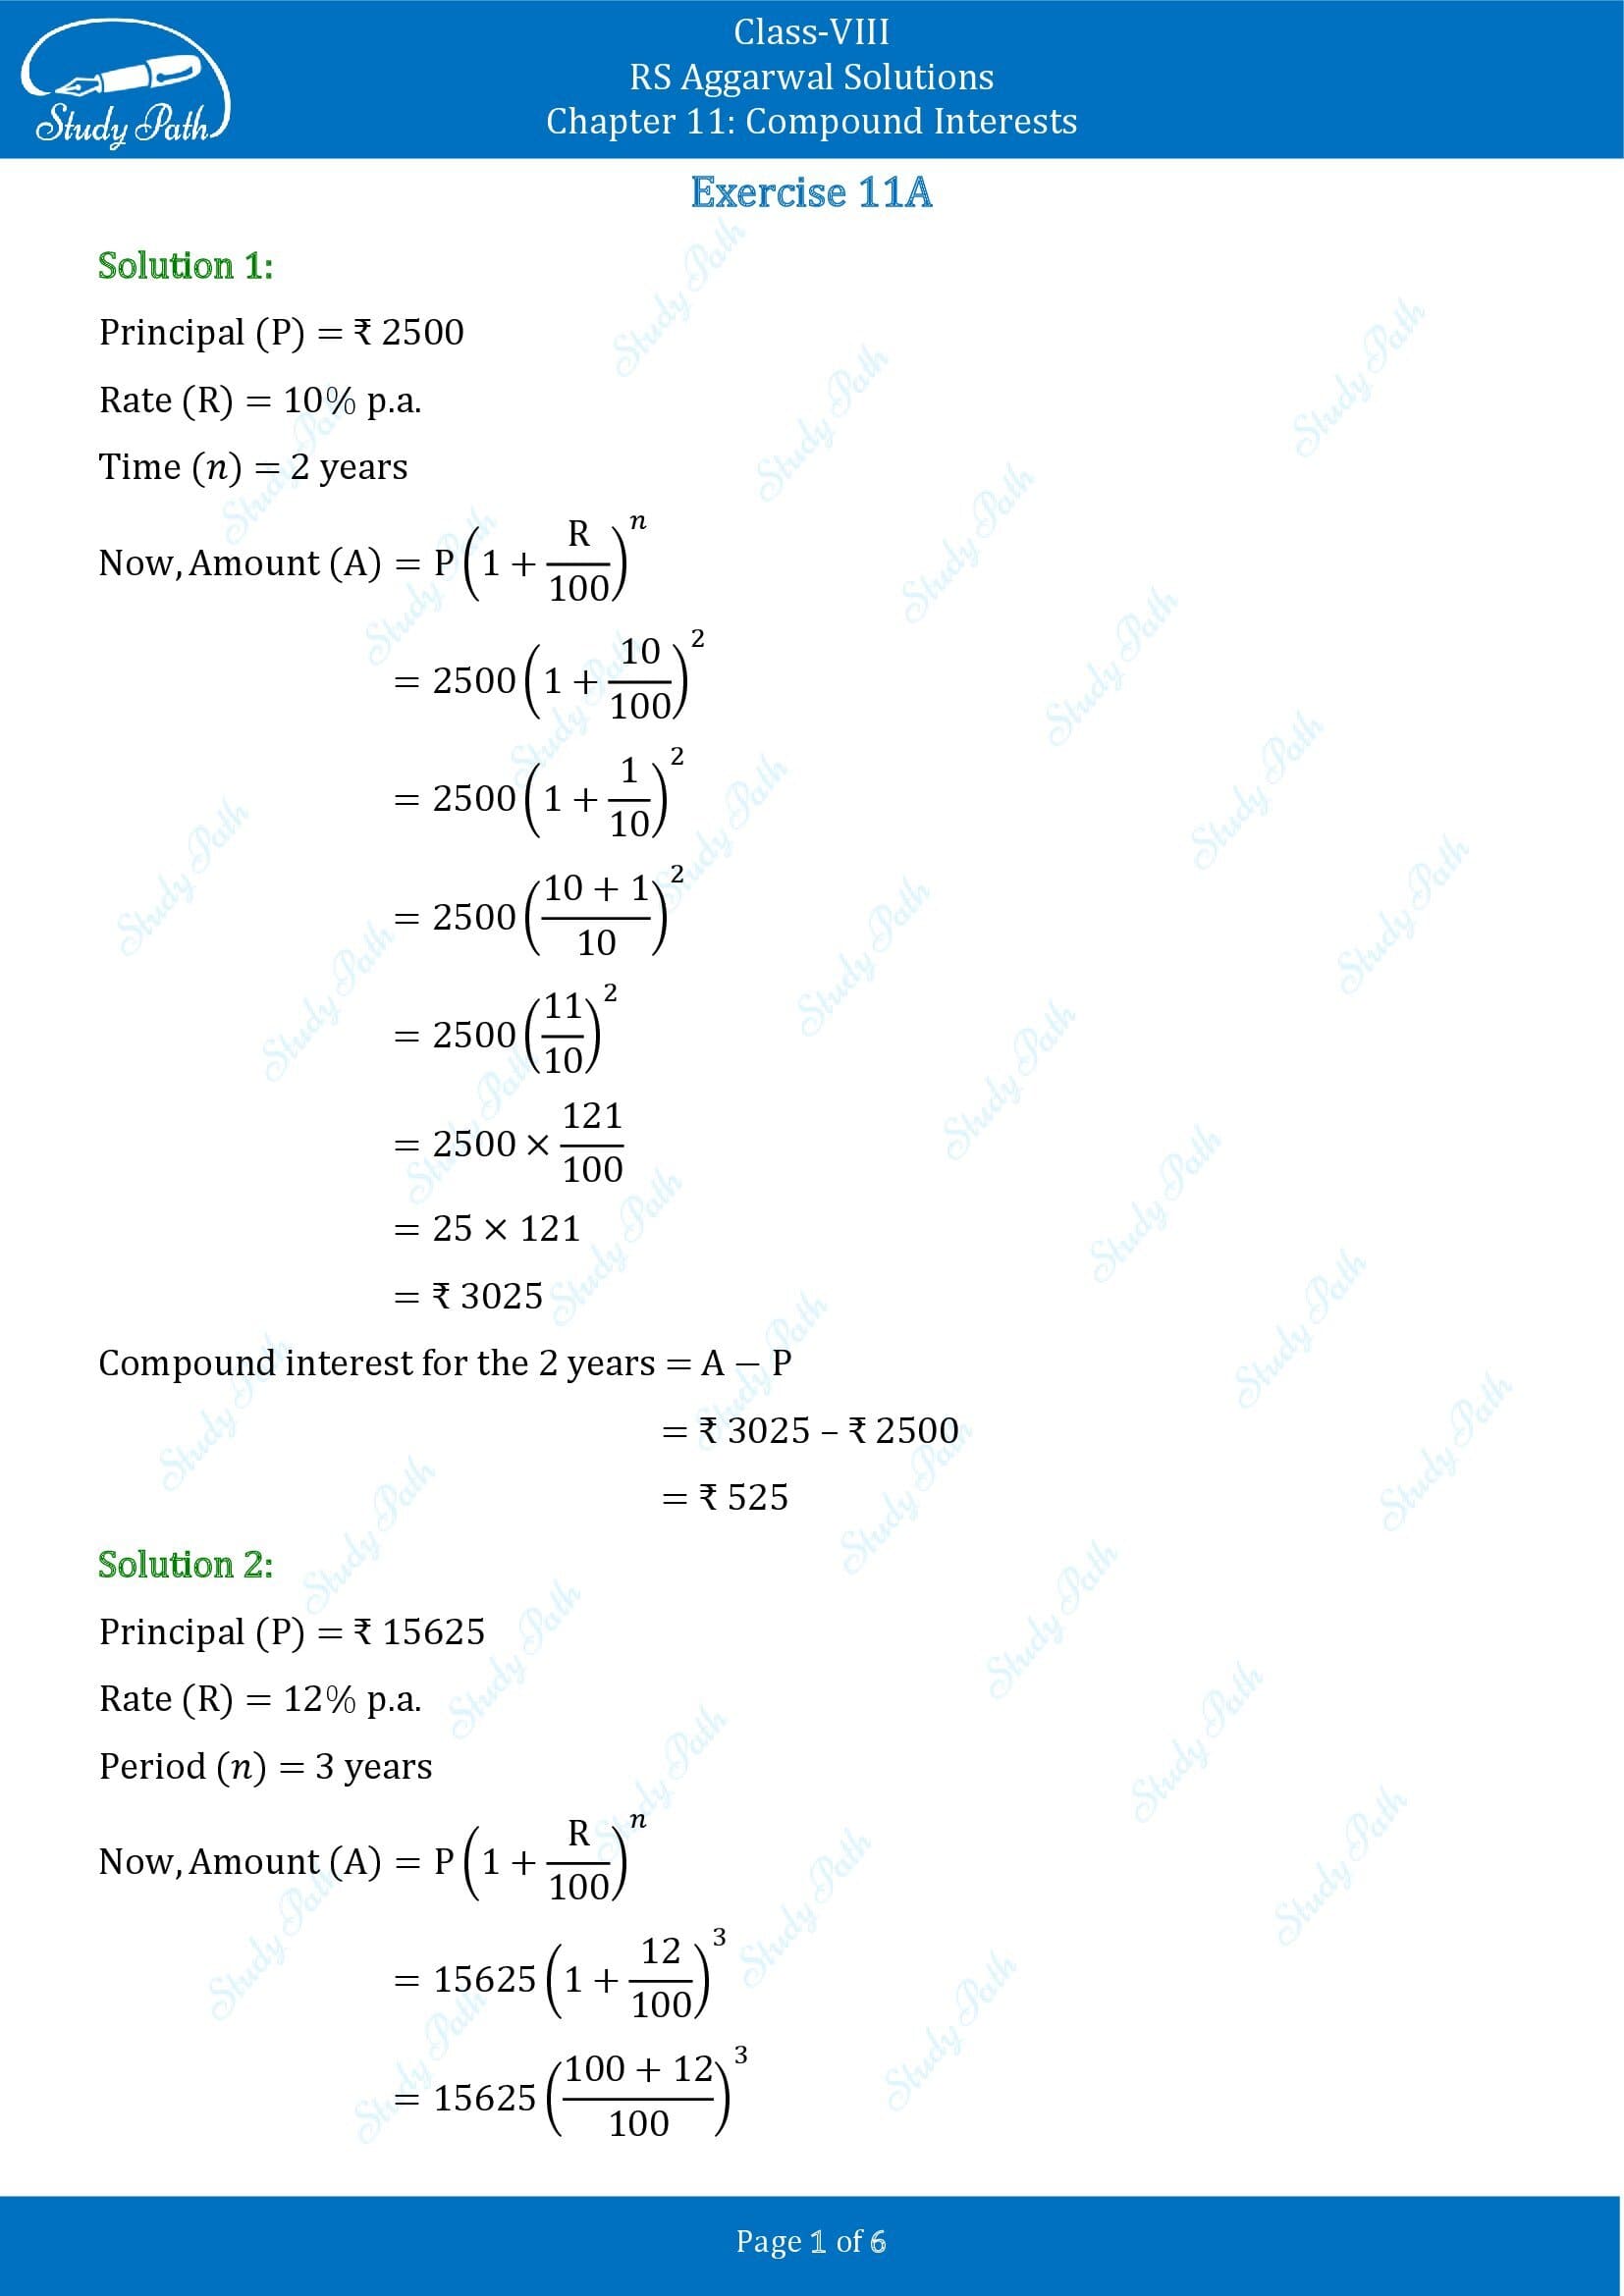 RS Aggarwal Solutions Class 8 Chapter 11 Compound Interests Exercise 11A 00001